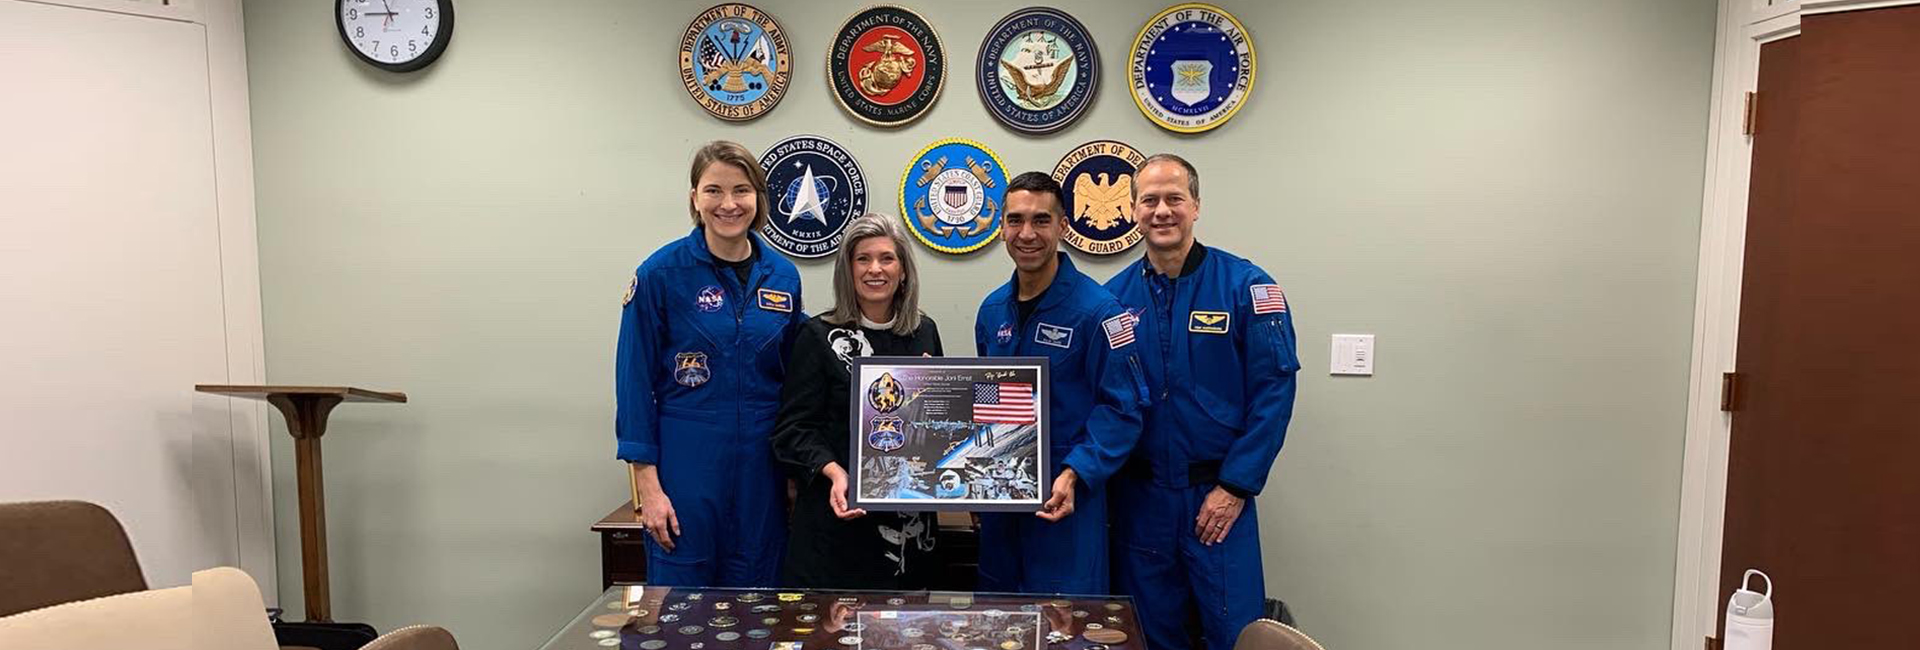 Indian-American NASA astronaut and the other members of Team Artemis met Congresswoman Ashley Hinson and Senator Joni Ernst in Washington DC, to thanks them for their support to the project.